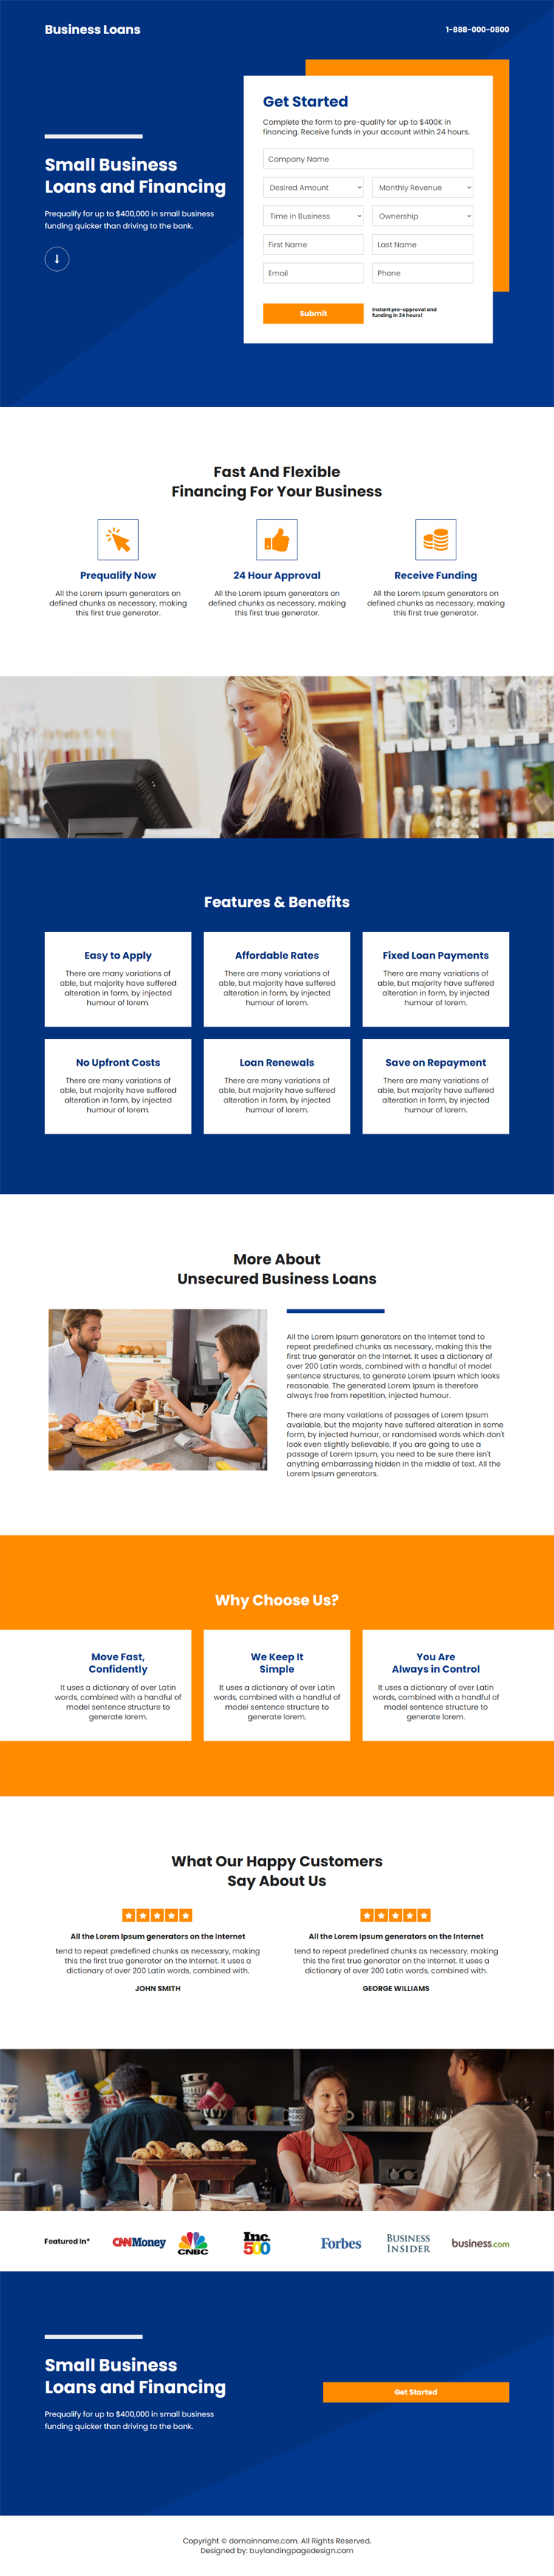 unsecured business loan and financing responsive landing page design